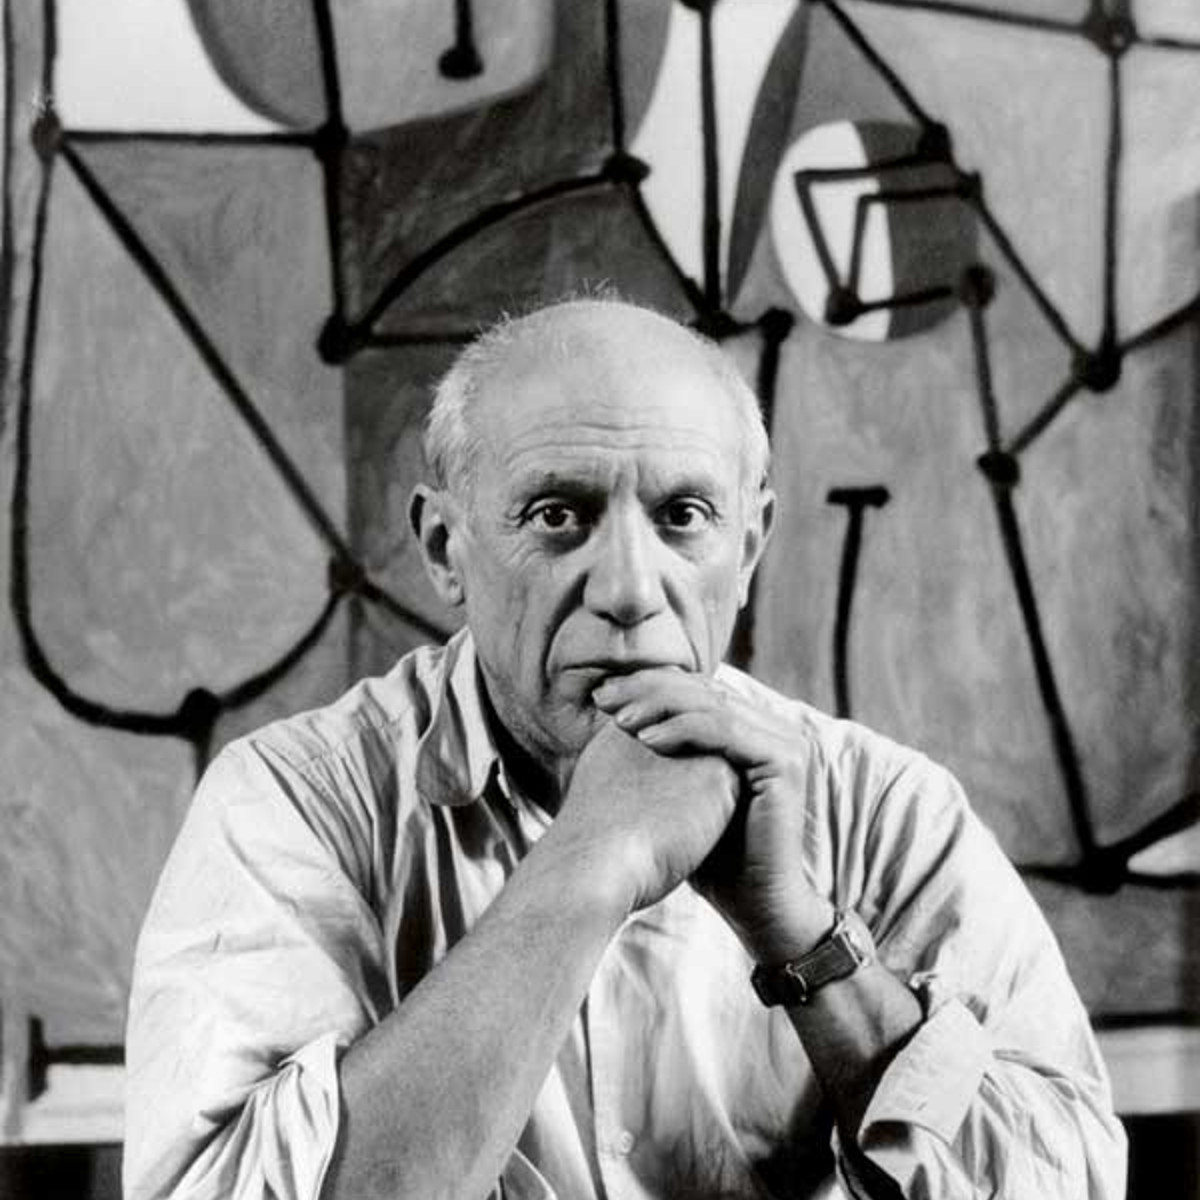 pablo picasso paintings